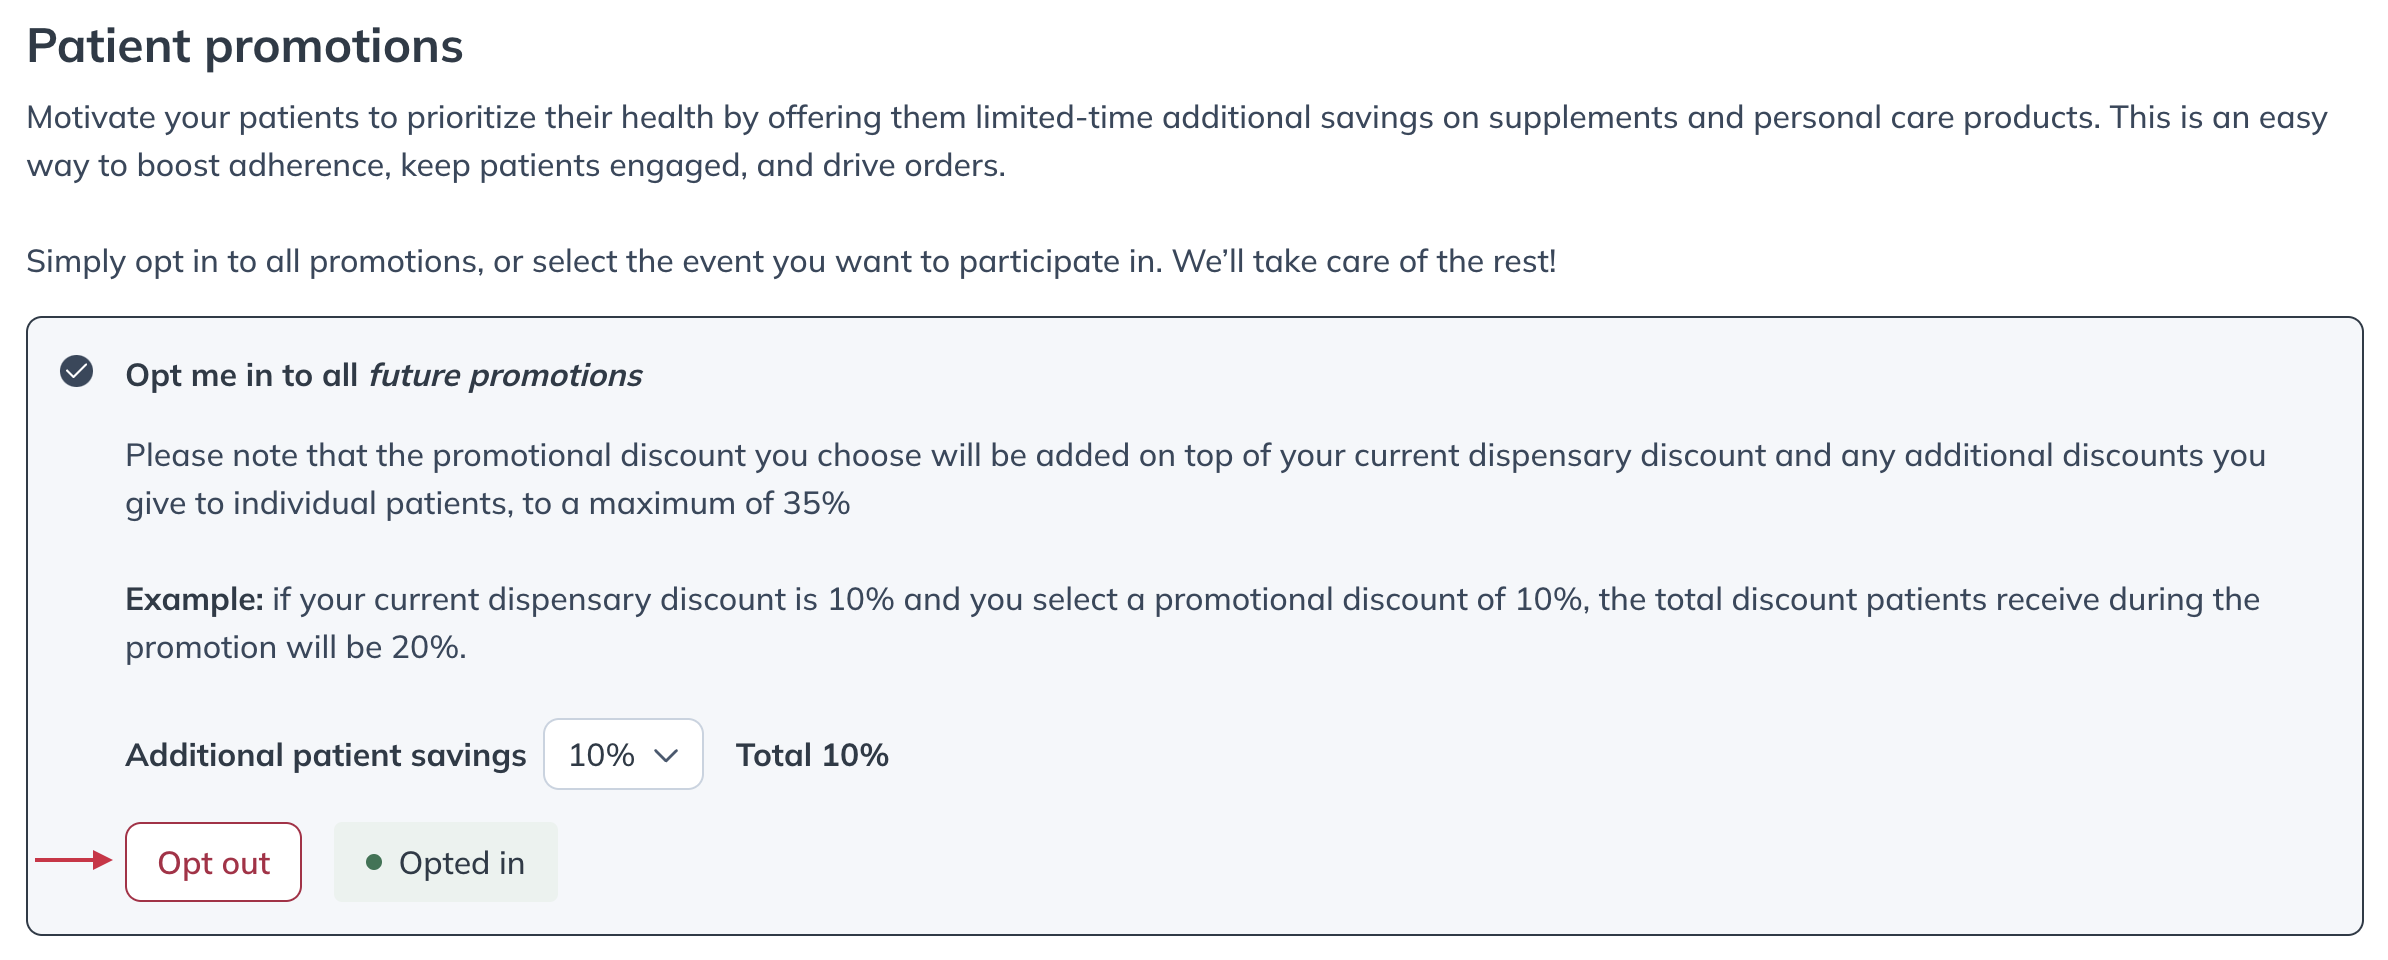 Opt out button below the selected promotions configuration